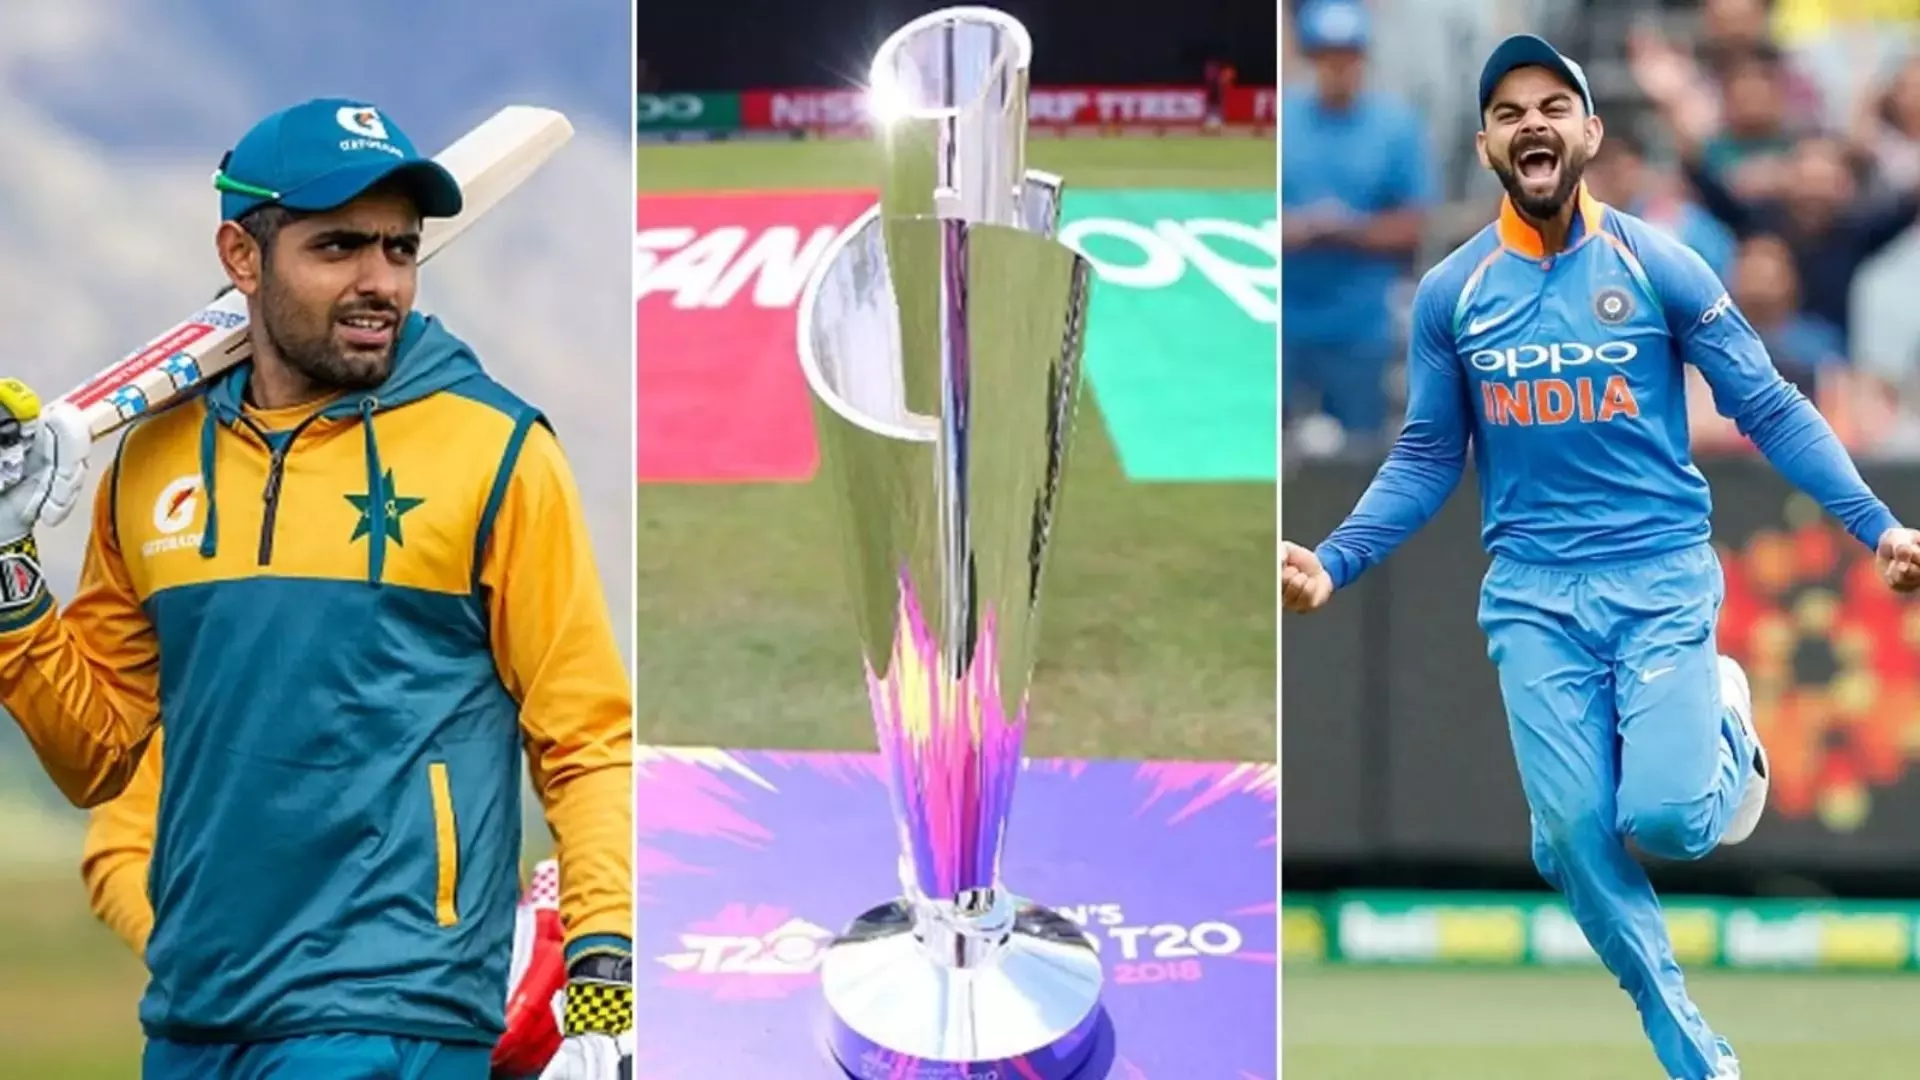 ICC Announced The Schedule of World Cup 2021